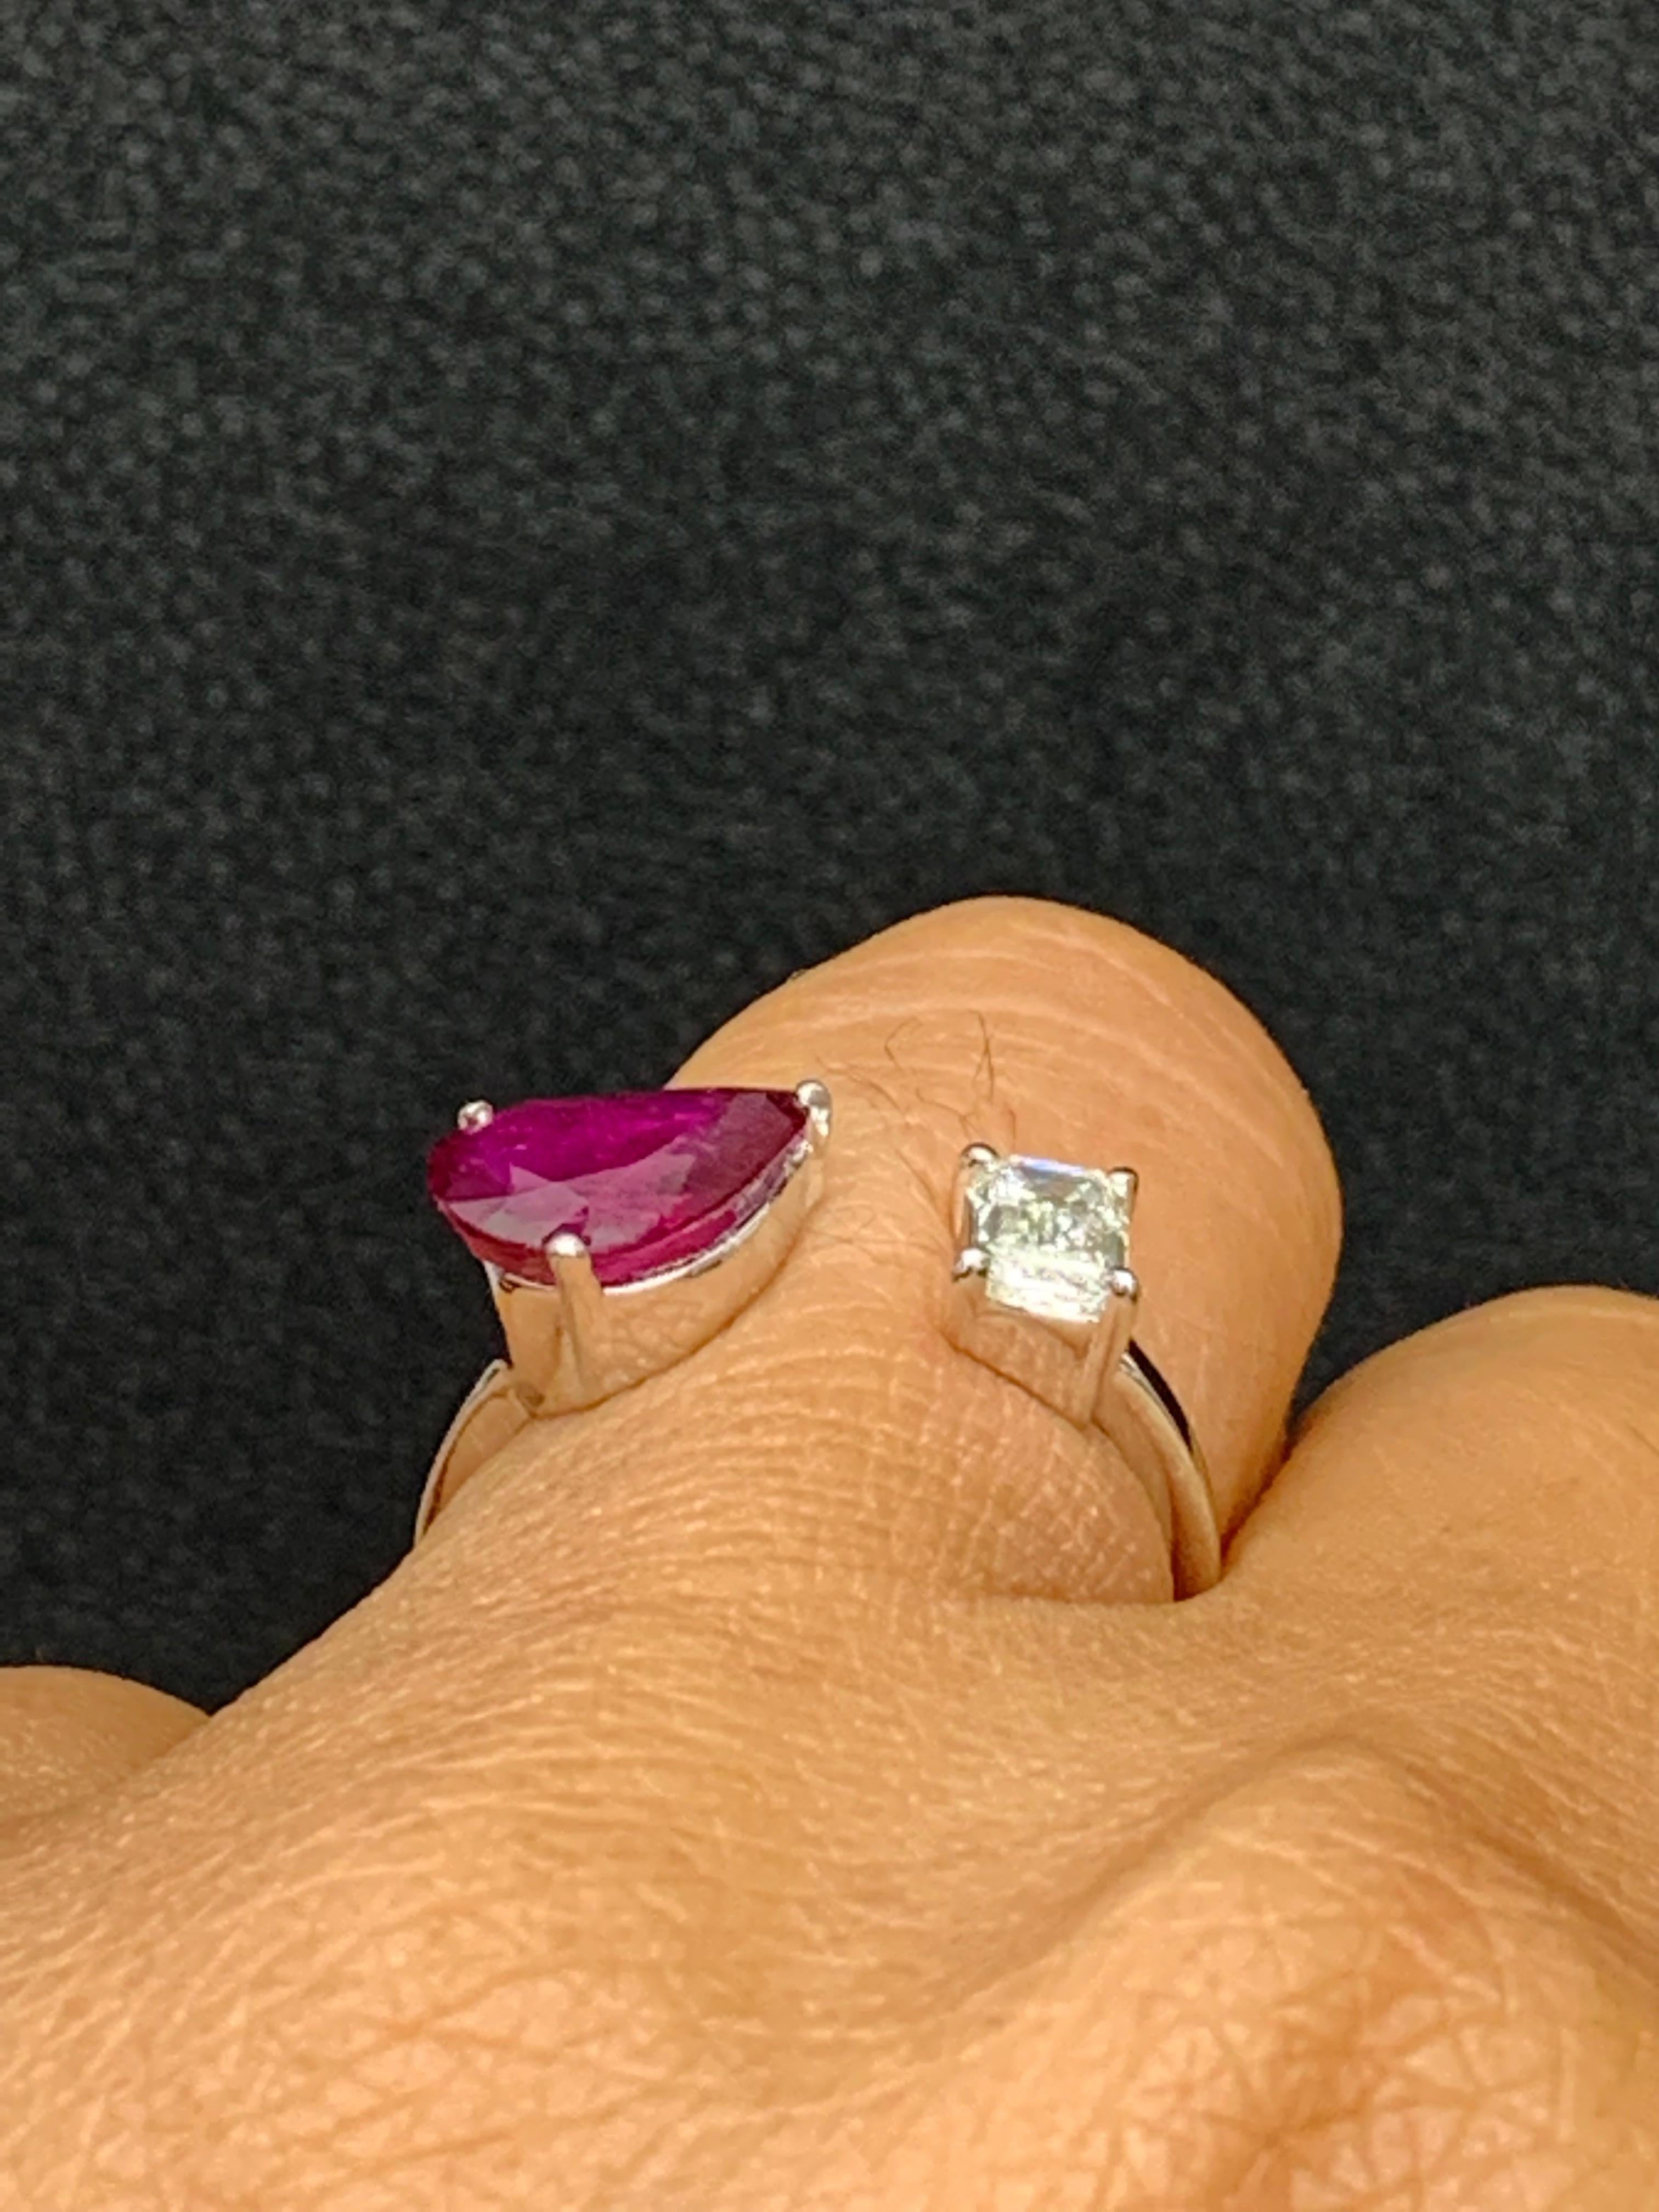 The stunning forever-together Toi et Moi ring features 1 Pear shape Ruby and 1 emerald cut Diamond Handcrafted in 14k White Gold.
Ruby weighs 1.29 carats and 1 diamond weighs 0.50 carats in total.
A classic Ring full of luster and shine.

Ring Size